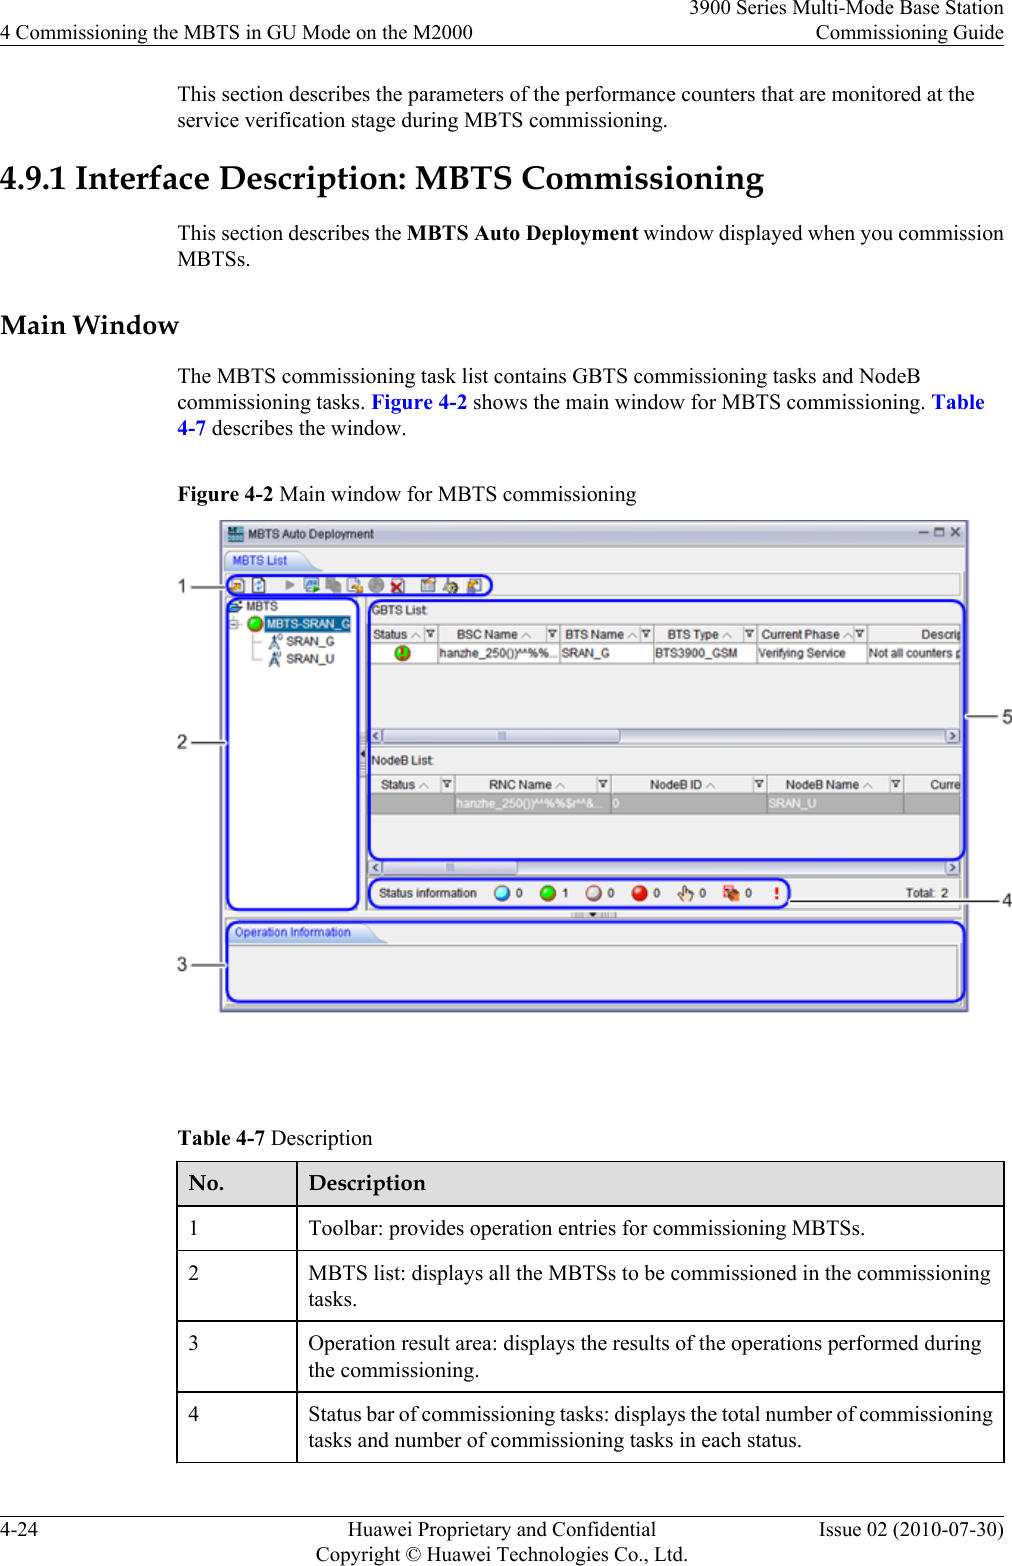 This section describes the parameters of the performance counters that are monitored at theservice verification stage during MBTS commissioning.4.9.1 Interface Description: MBTS CommissioningThis section describes the MBTS Auto Deployment window displayed when you commissionMBTSs.Main WindowThe MBTS commissioning task list contains GBTS commissioning tasks and NodeBcommissioning tasks. Figure 4-2 shows the main window for MBTS commissioning. Table4-7 describes the window.Figure 4-2 Main window for MBTS commissioning Table 4-7 DescriptionNo. Description1Toolbar: provides operation entries for commissioning MBTSs.2 MBTS list: displays all the MBTSs to be commissioned in the commissioningtasks.3 Operation result area: displays the results of the operations performed duringthe commissioning.4 Status bar of commissioning tasks: displays the total number of commissioningtasks and number of commissioning tasks in each status.4 Commissioning the MBTS in GU Mode on the M20003900 Series Multi-Mode Base StationCommissioning Guide4-24 Huawei Proprietary and ConfidentialCopyright © Huawei Technologies Co., Ltd.Issue 02 (2010-07-30)